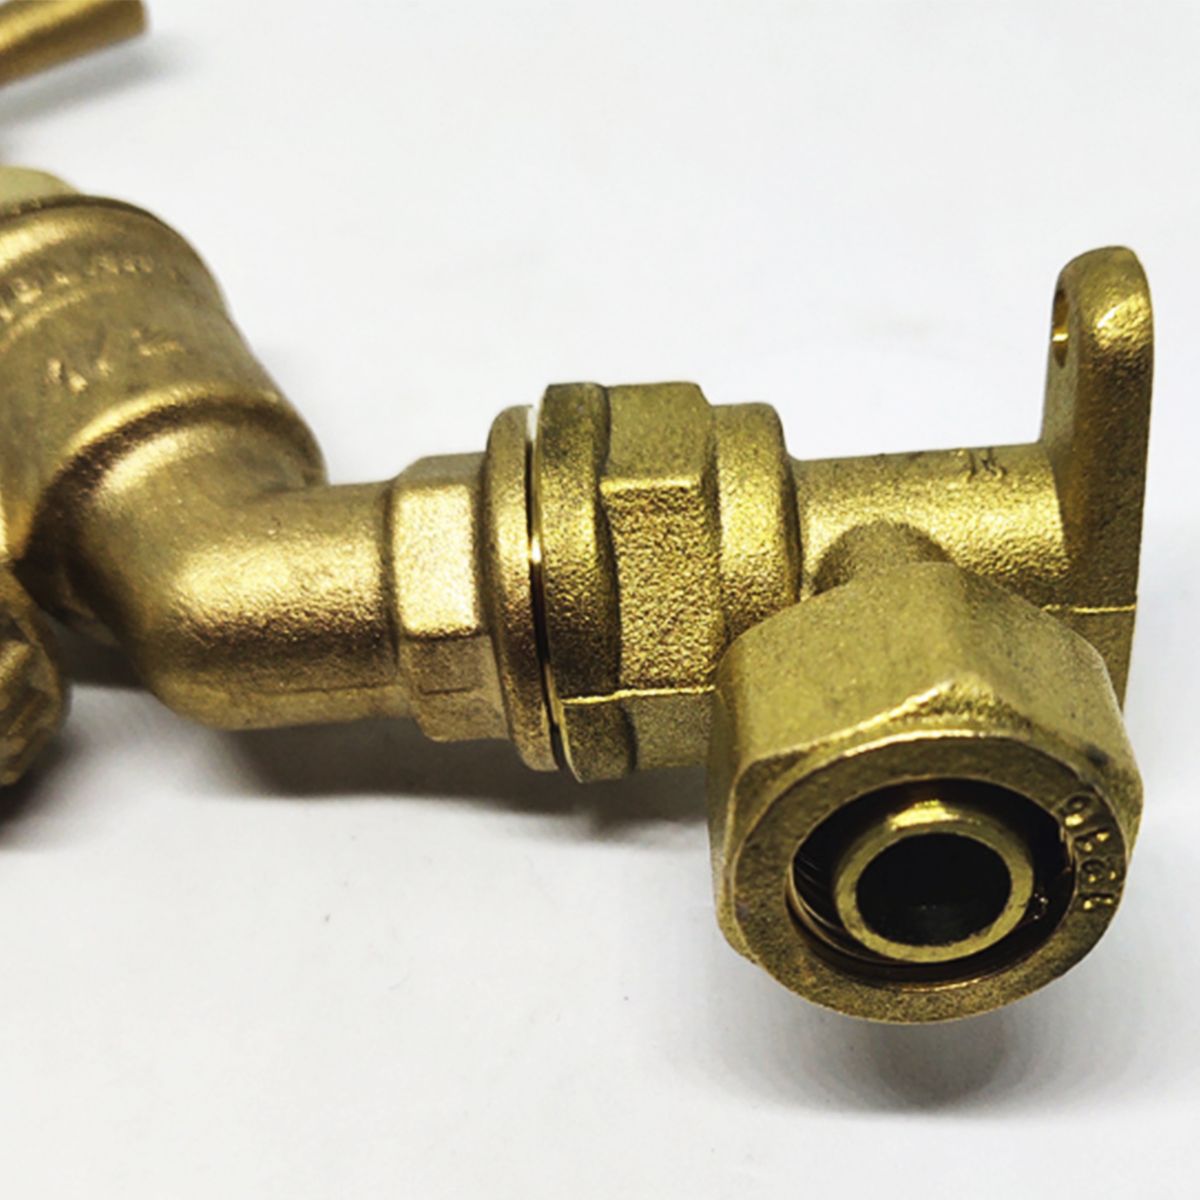 Brass-Faucet-Adapter-Two-Way-Valve-IBC-Tank-Fittings-Accessories-1549356